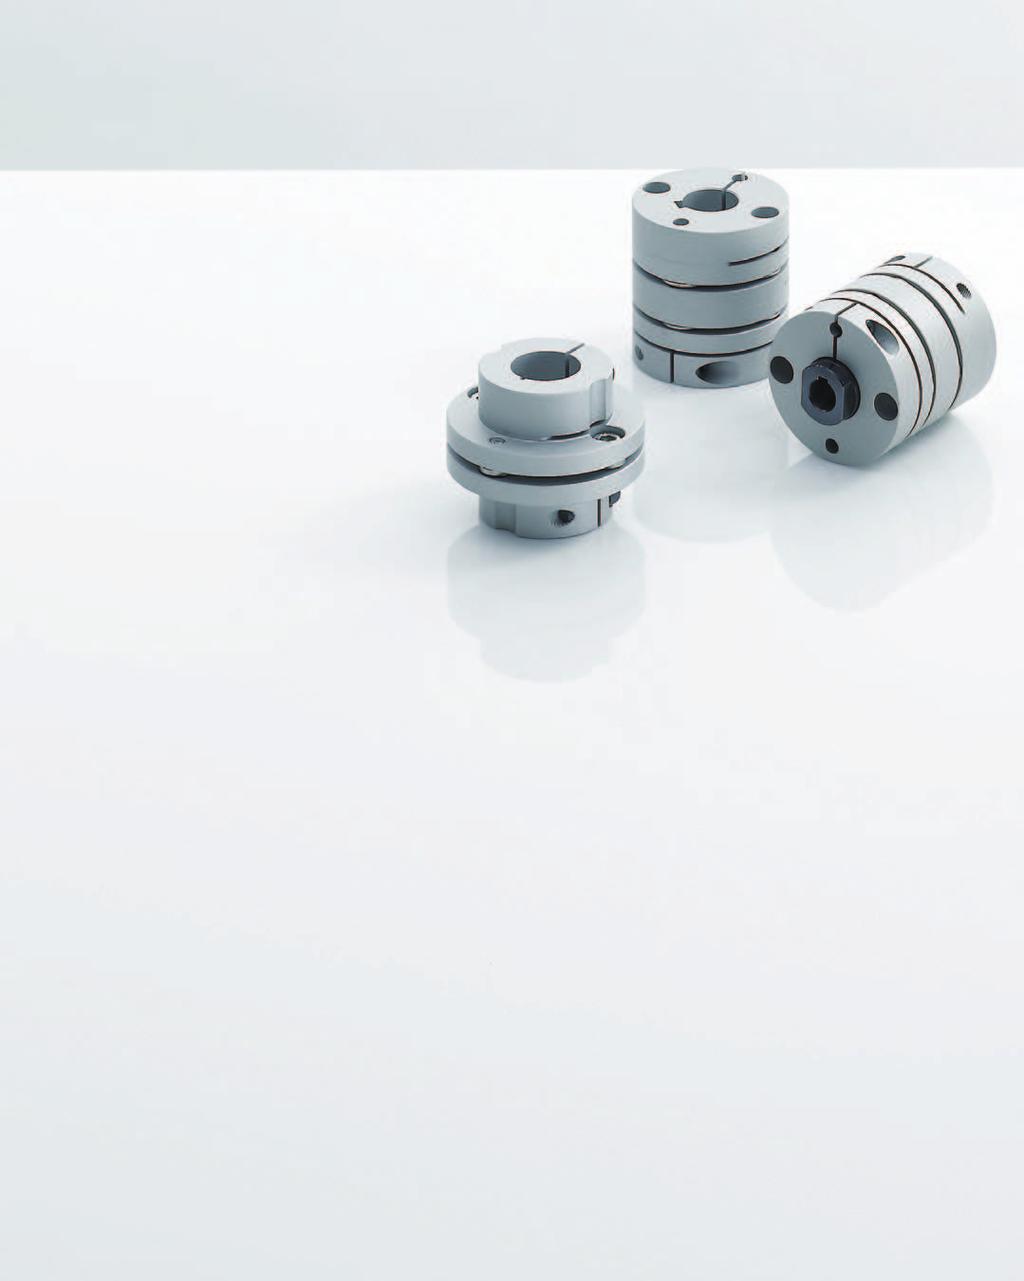 SFC MODEL SFC : A Wide Selection of Metal Plate Spring Couplings Made of High-power Aluminum Alloy Two types of couplings, either a rigid type with one element or a flexible type with two elements